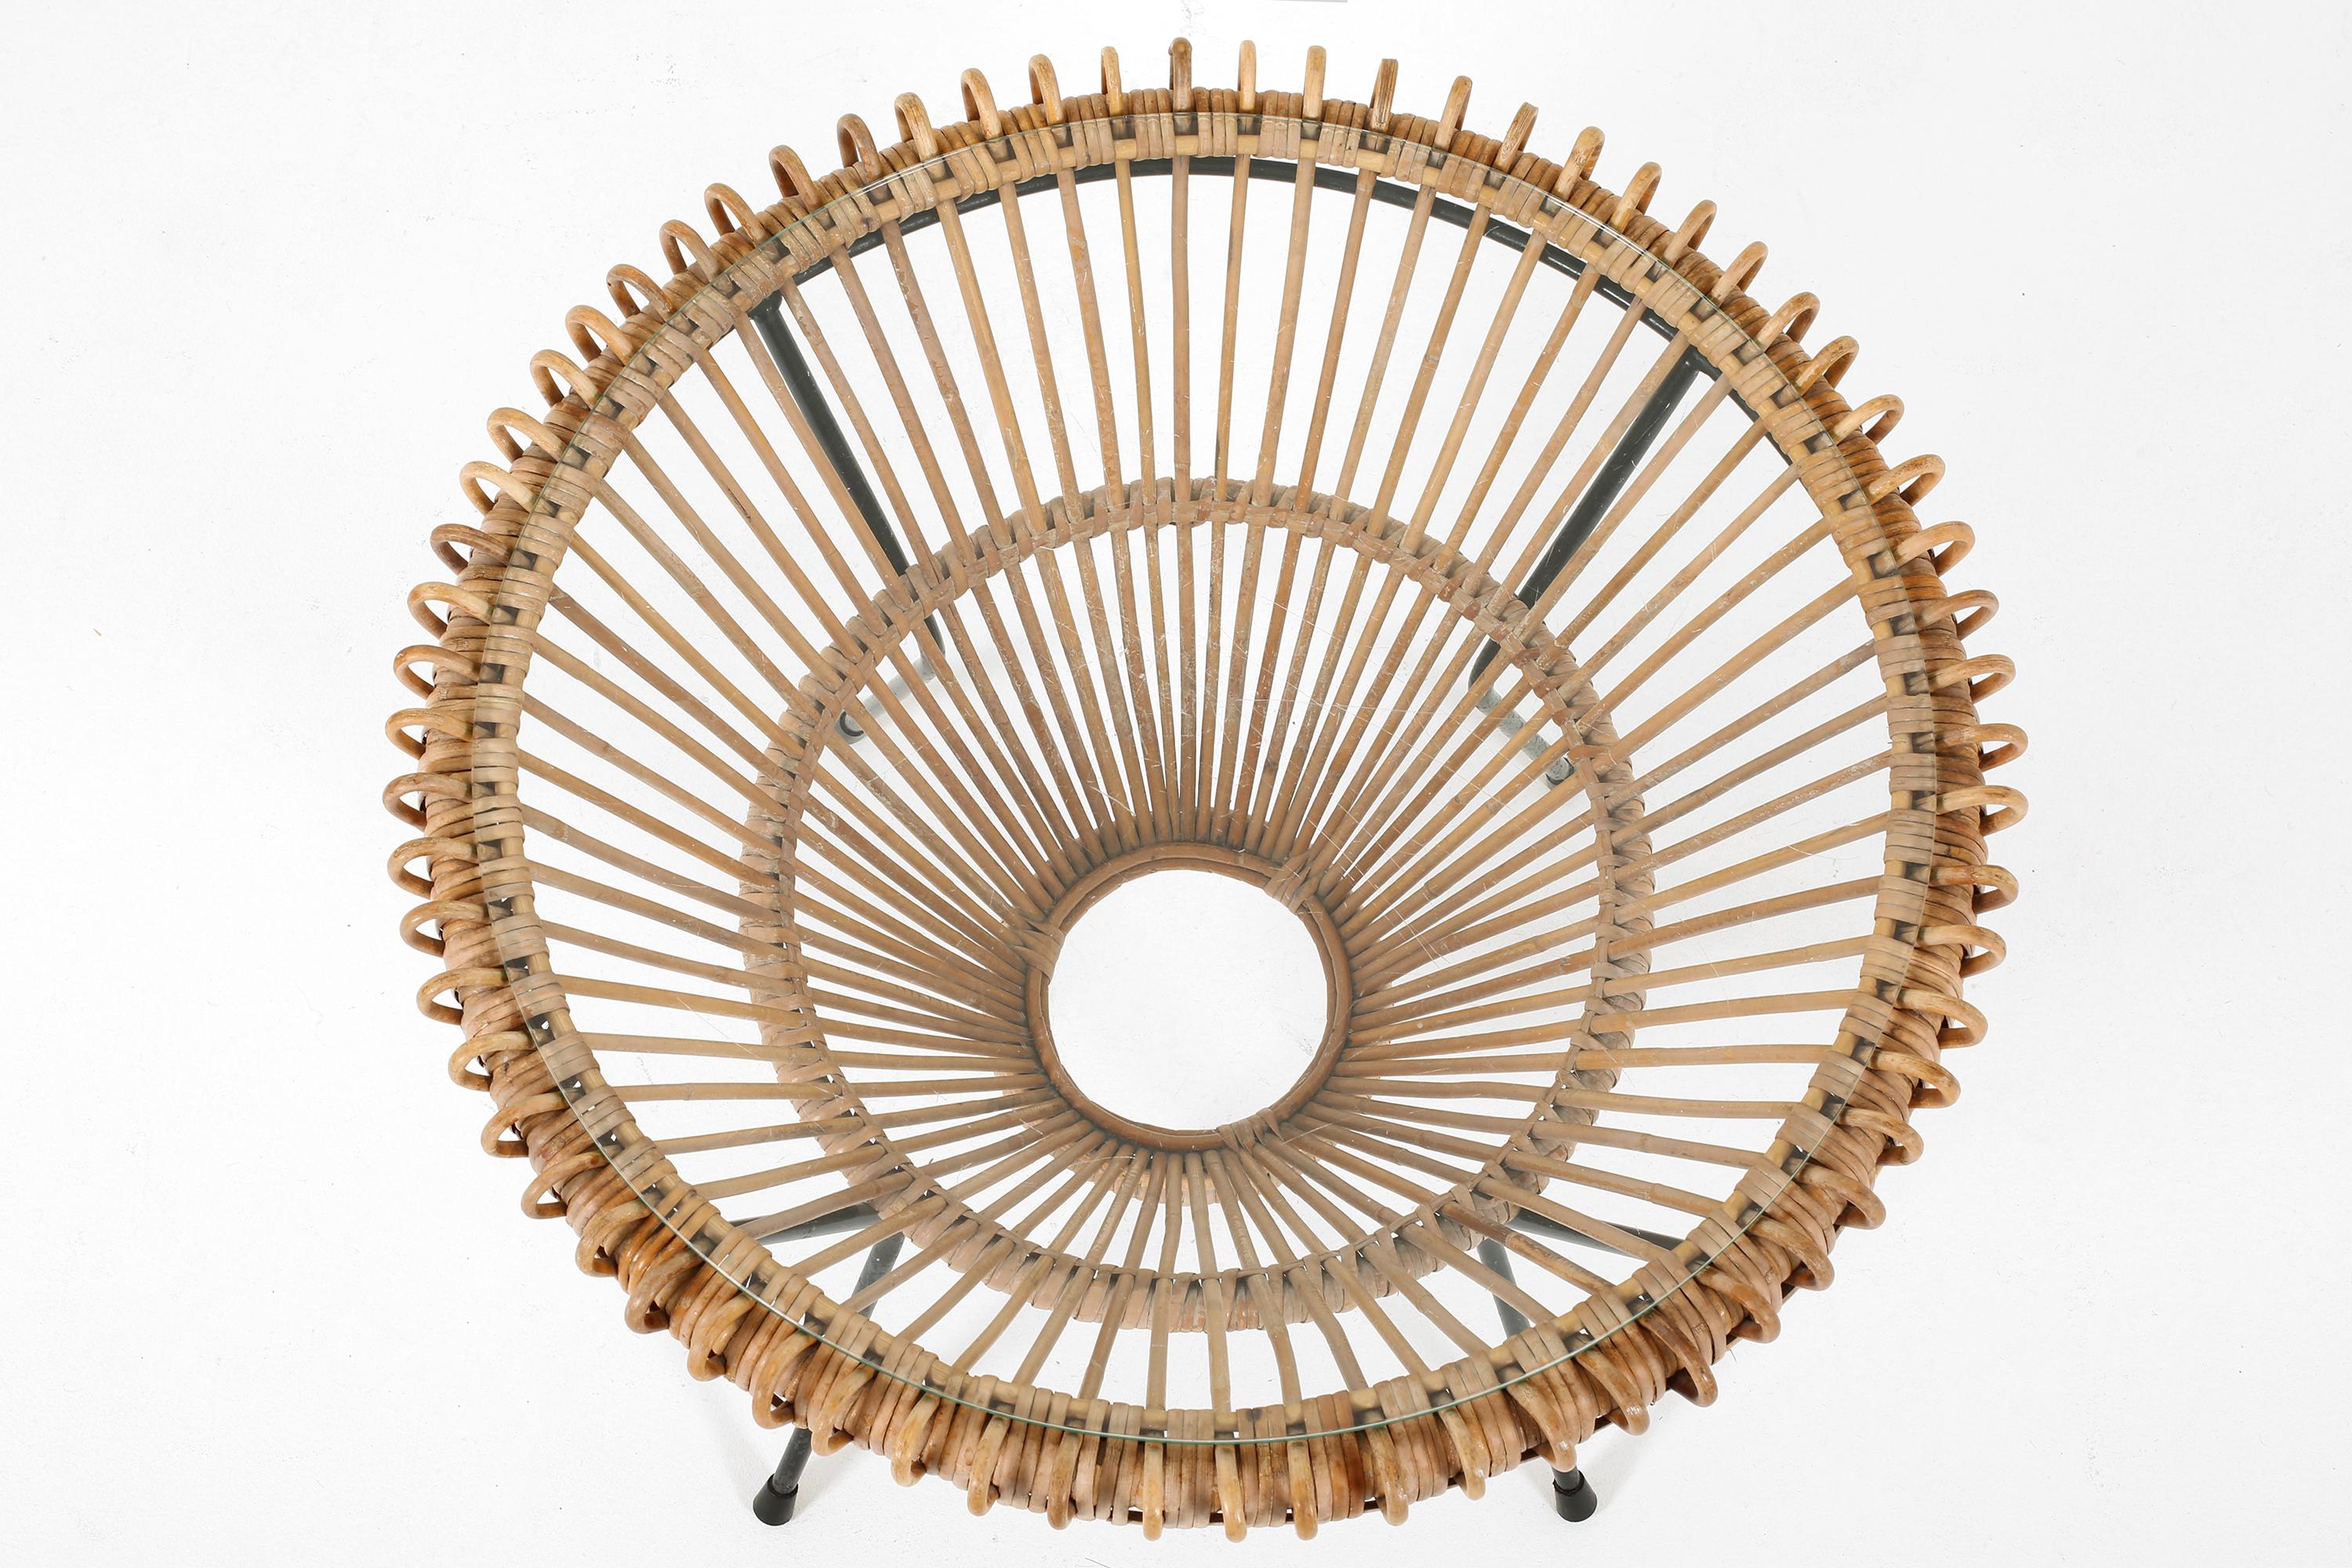 20th Century Rattan & Glass Occasional Side Coffee Table by Franco Albini, Italian c. 1950s